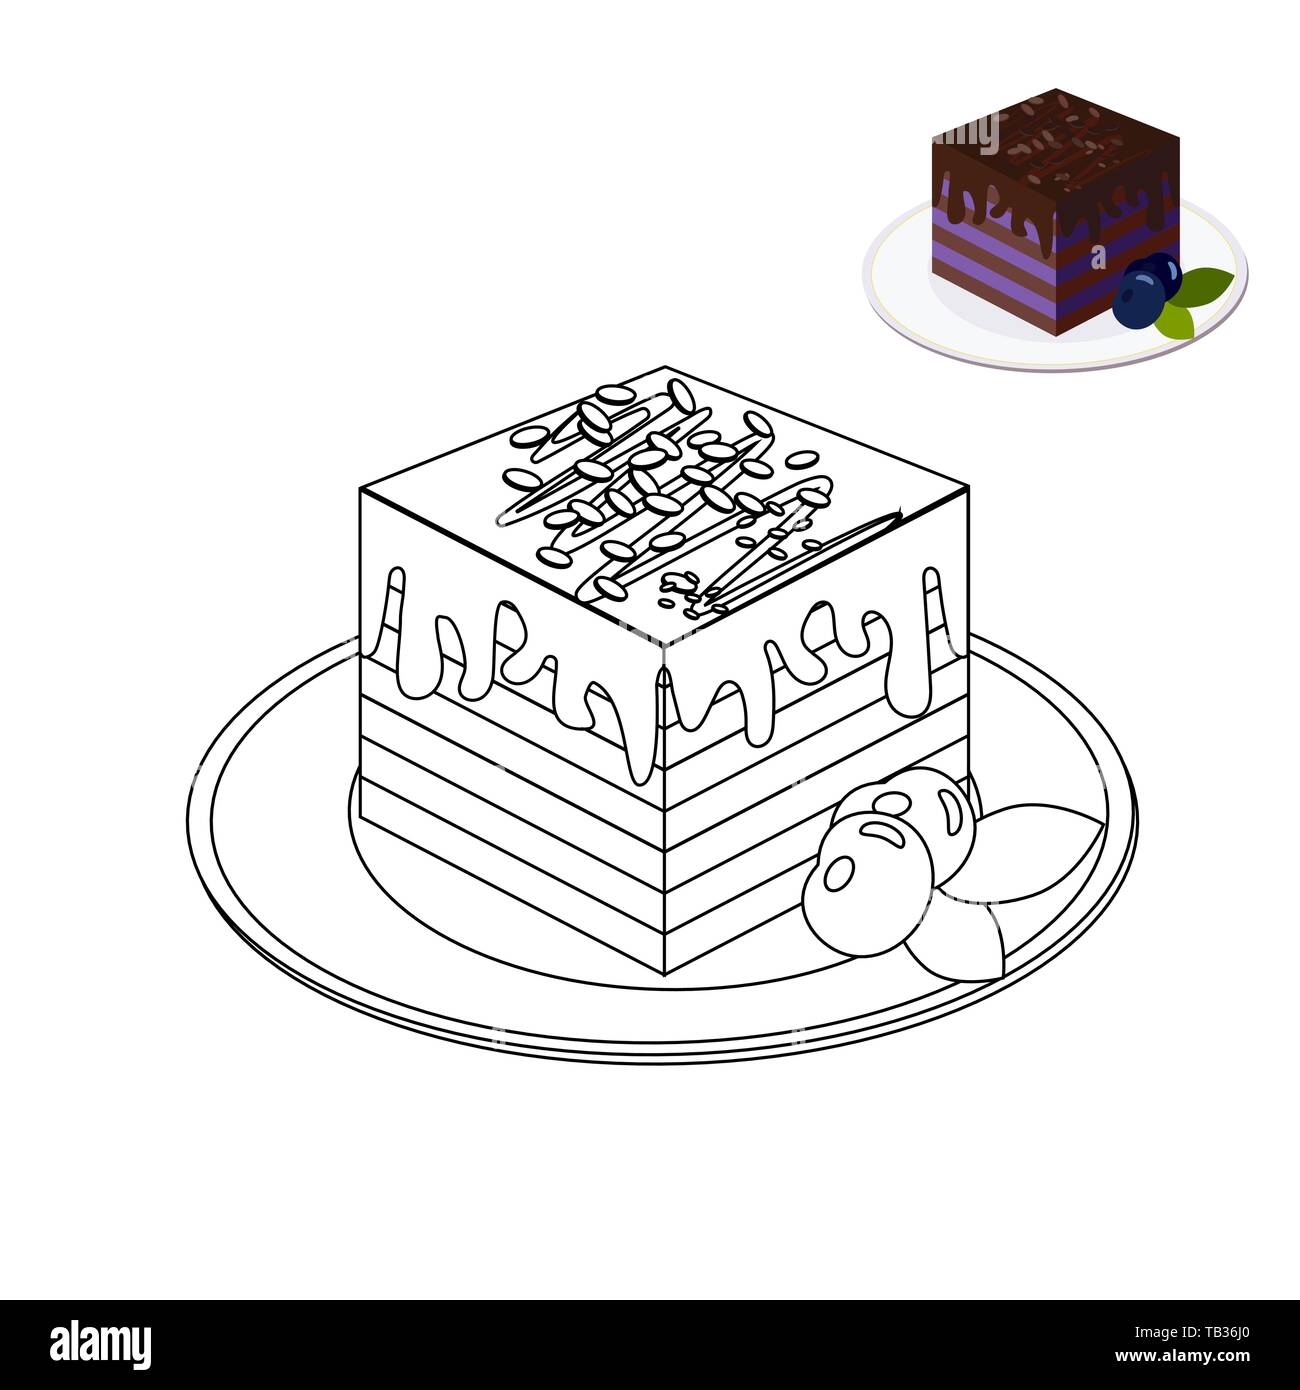 chocolate cake coloring page